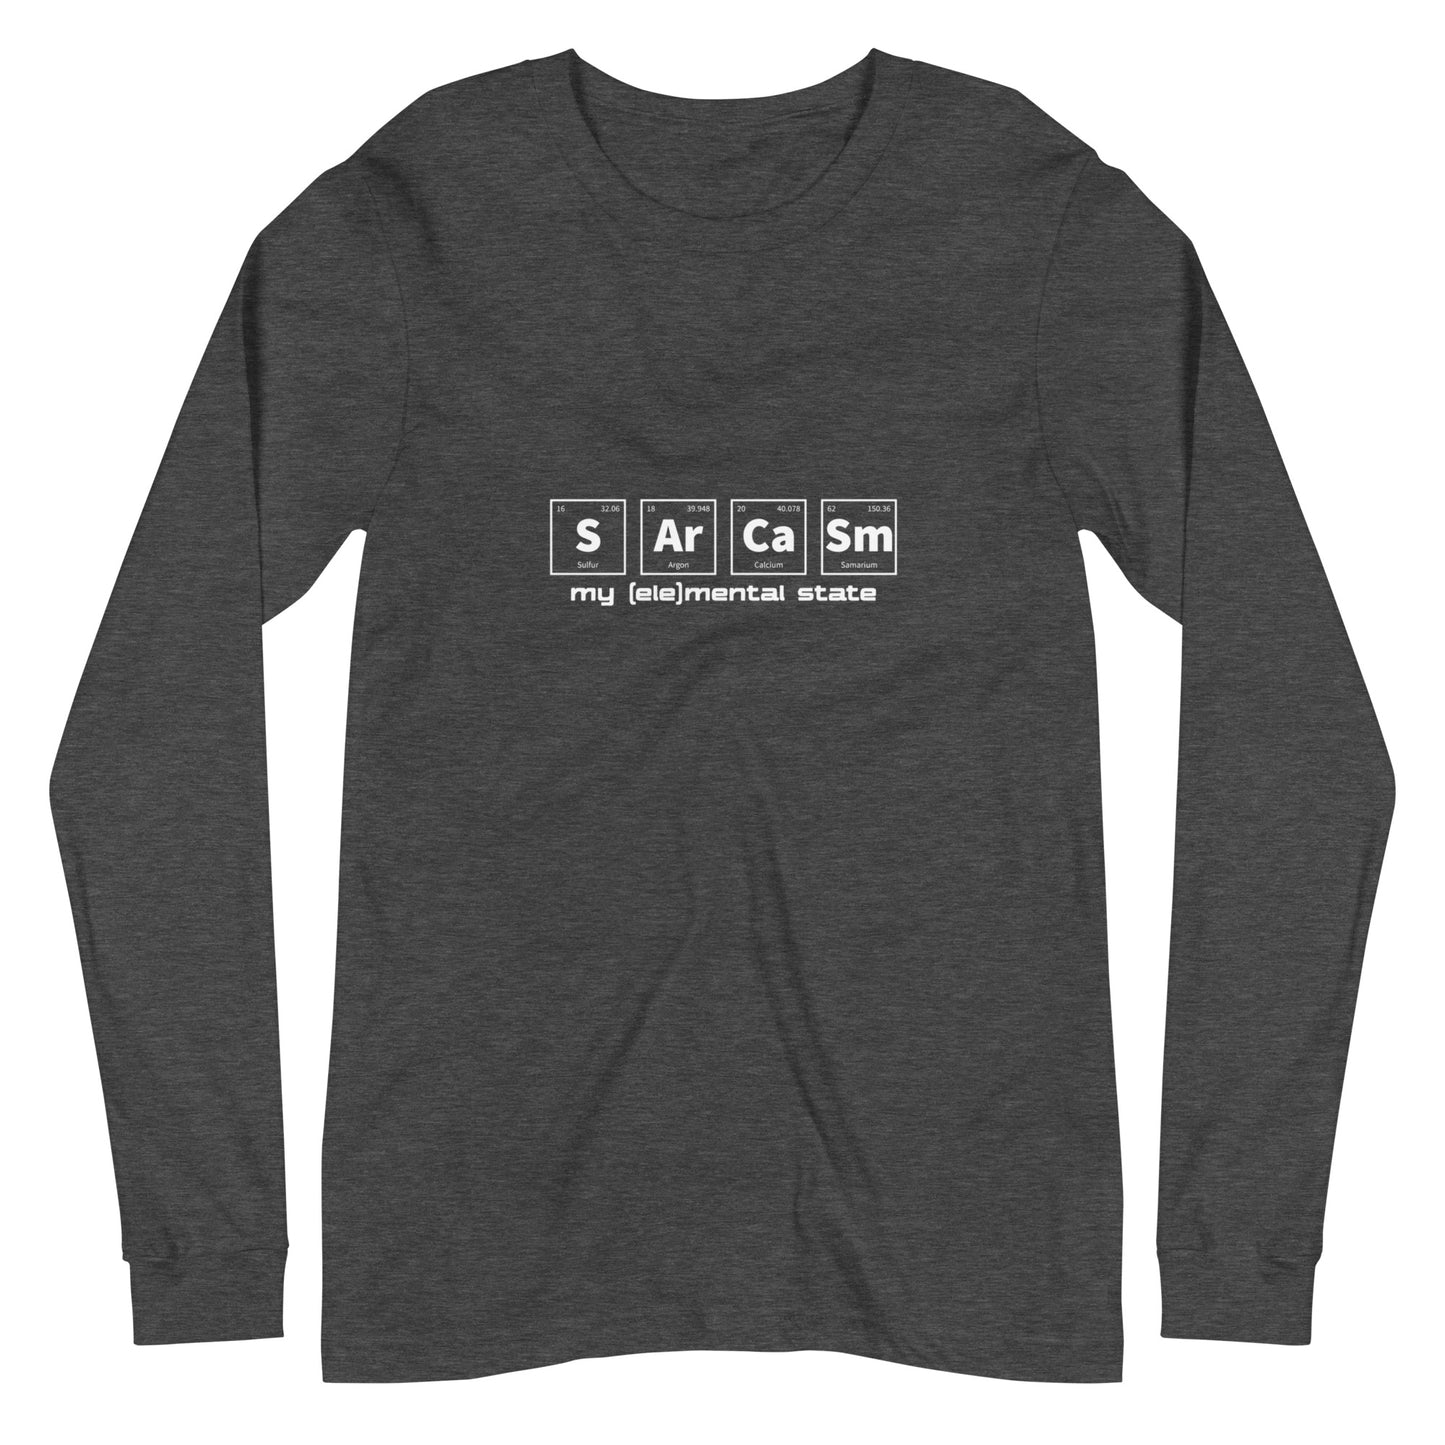 Dark Grey Heather long sleeve t-shirt with graphic of periodic table of elements symbols for Sulfur (S), Argon (Ar), Calcium (Ca), and Samarium (Sm) and text "my (ele)mental state"